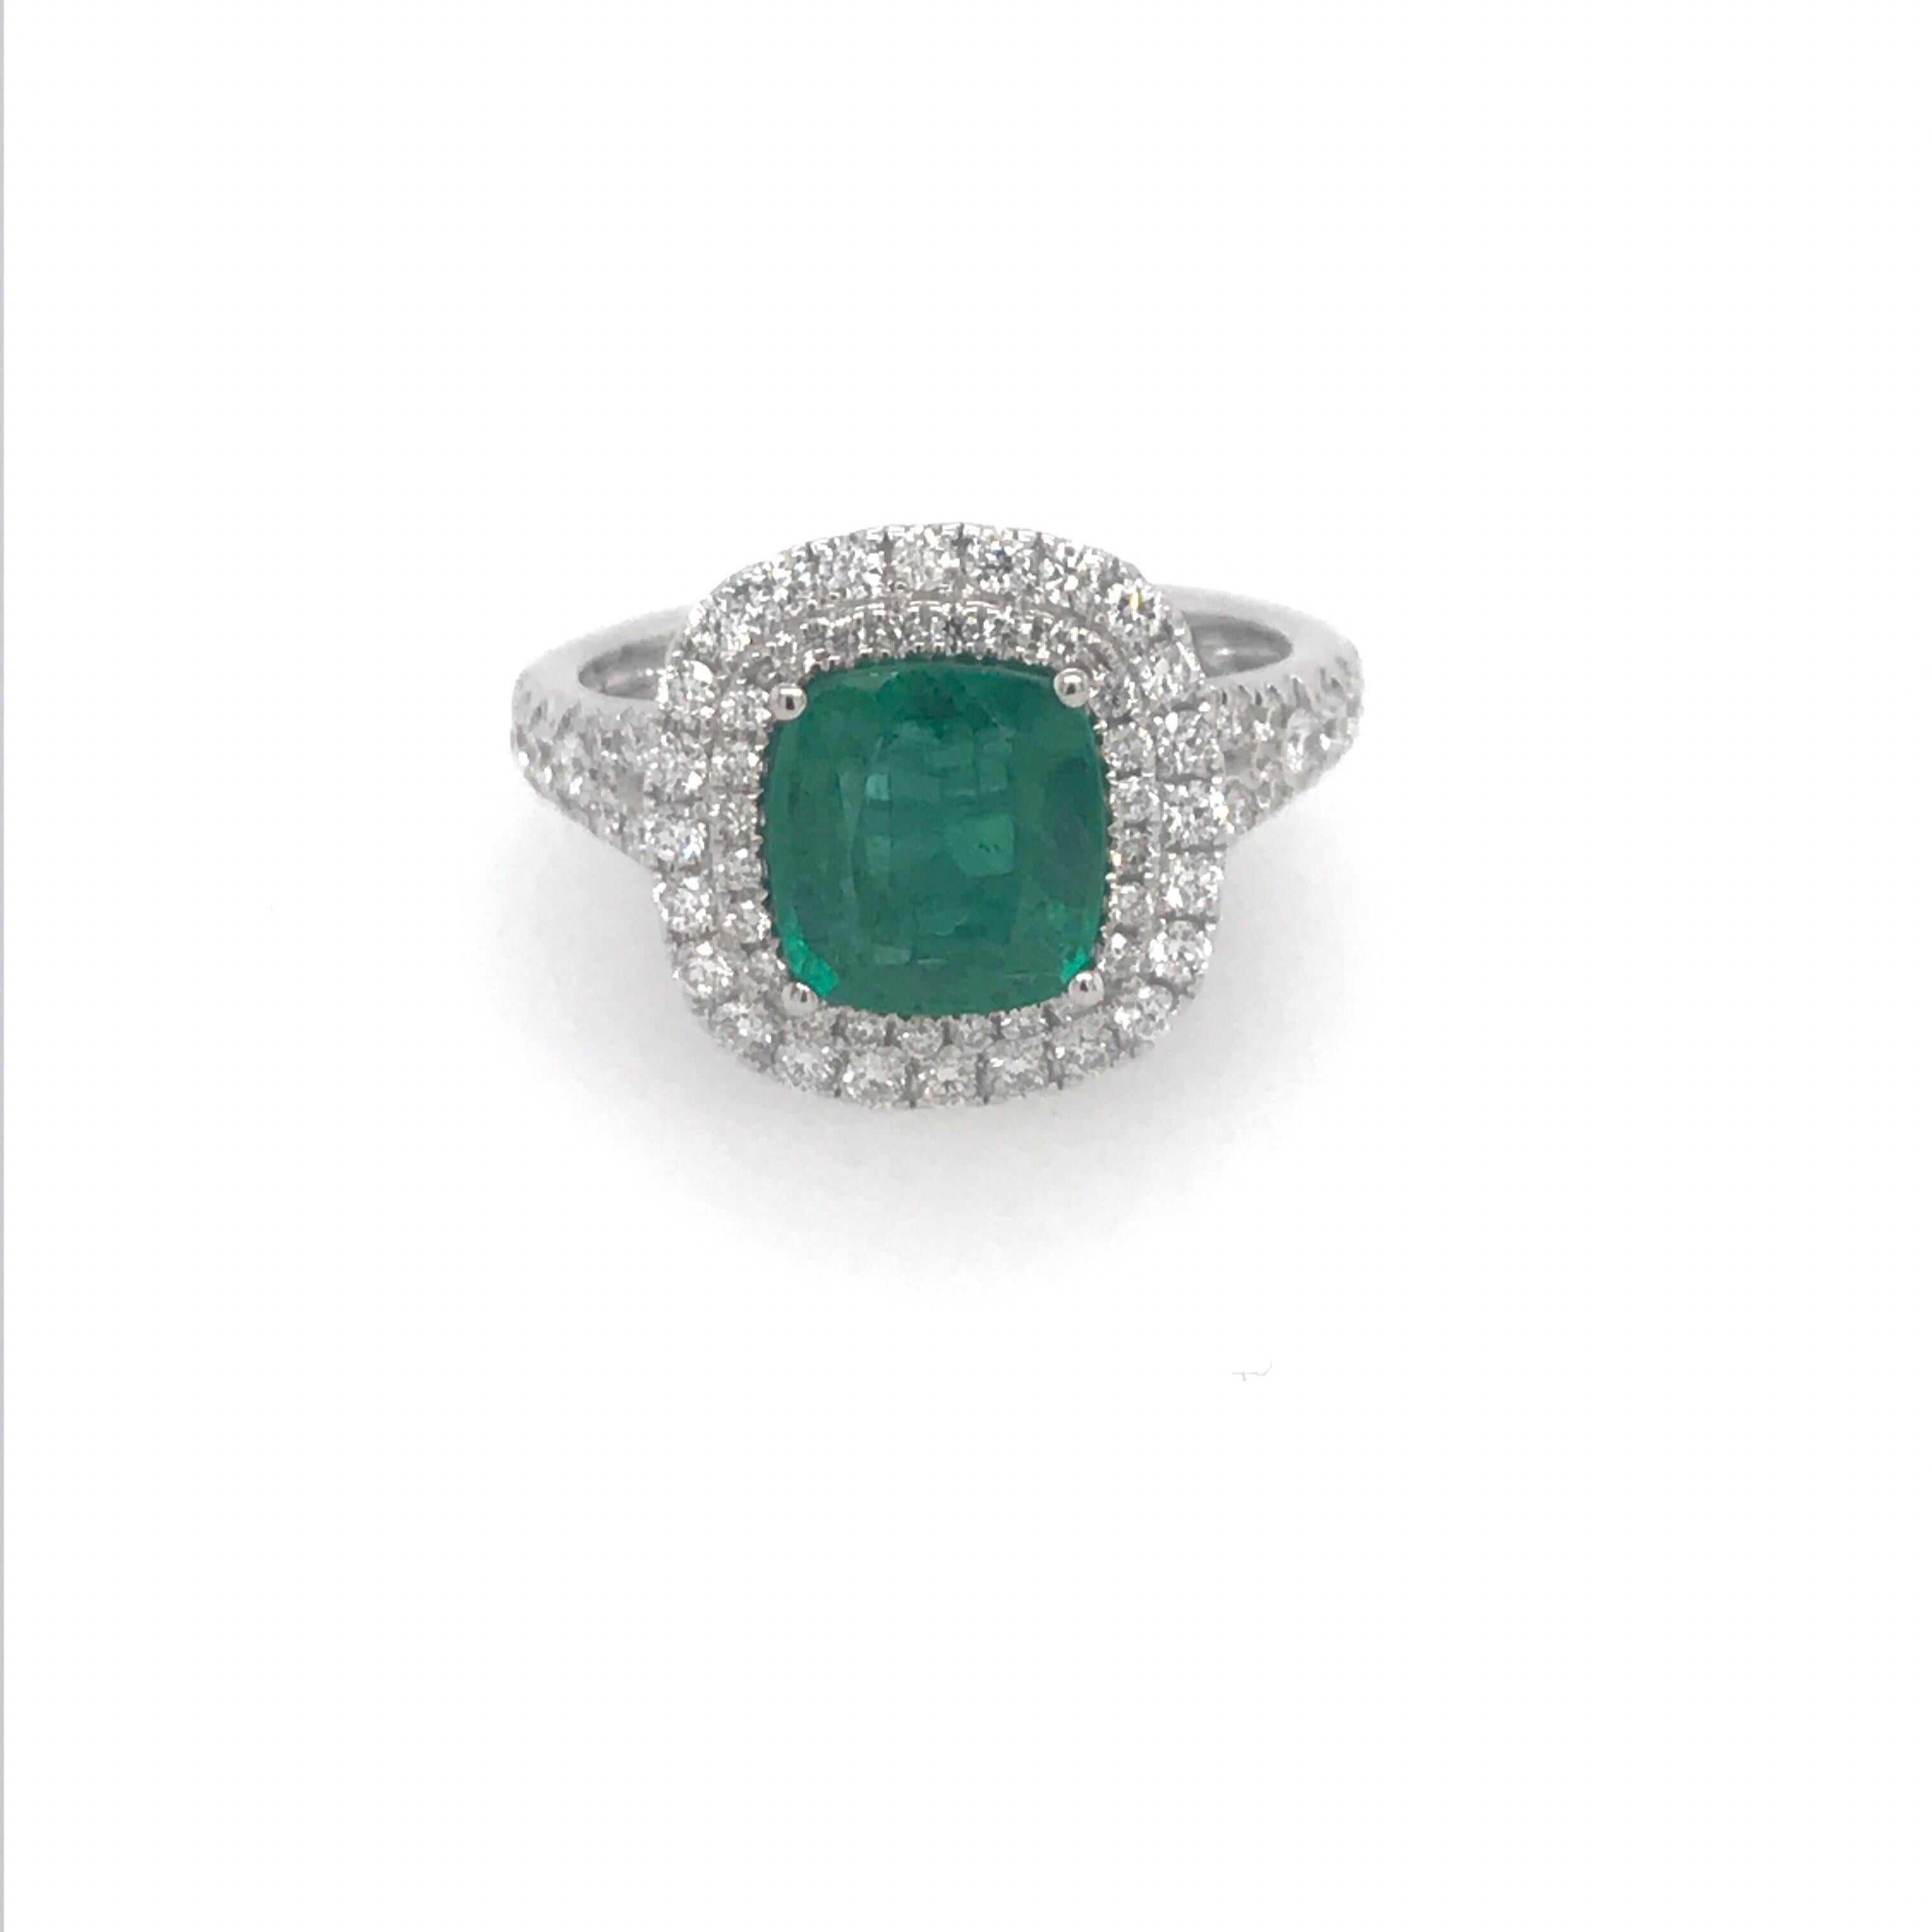 18K White gold ring featuring one cushion cut green emerald weighing 1.99 carats flanked with a double halo and split shank weighing 0.65 carats.
Color G-H
Clarity SI

A beautiful ring!!!